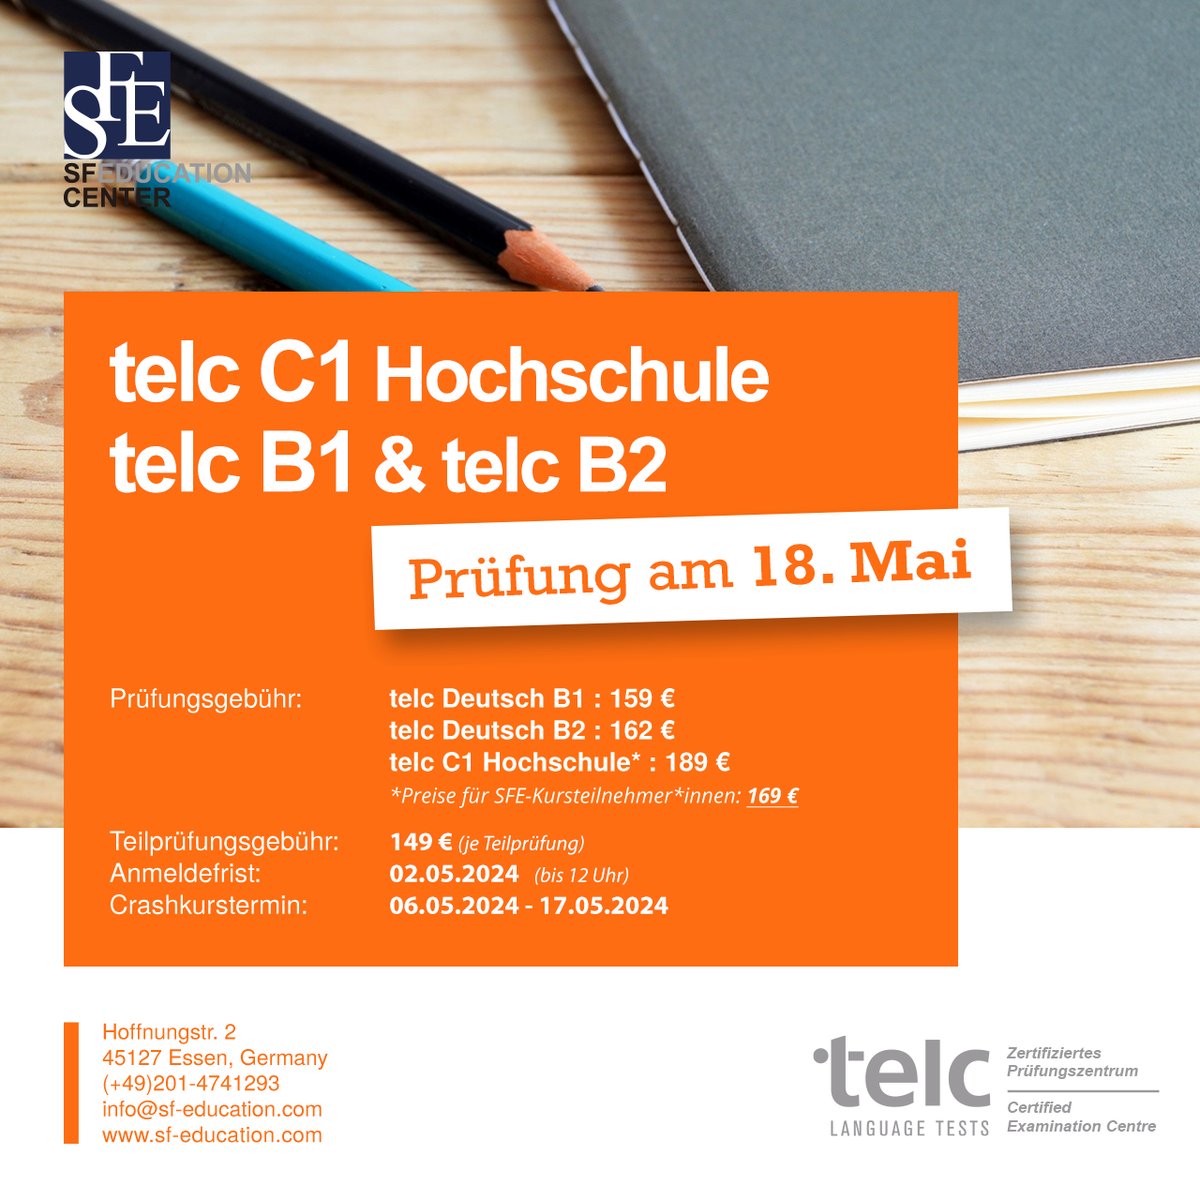 Are you ready?😃
Use your opportunity to take part in the next Telc exam in May.

Any questions? Just get in touch with us😊

Your SFE Team💙

[Ad]
#telc #sprachprüfung #languagetest #learngerman #workingermany #studyingermany #study #language #school #german